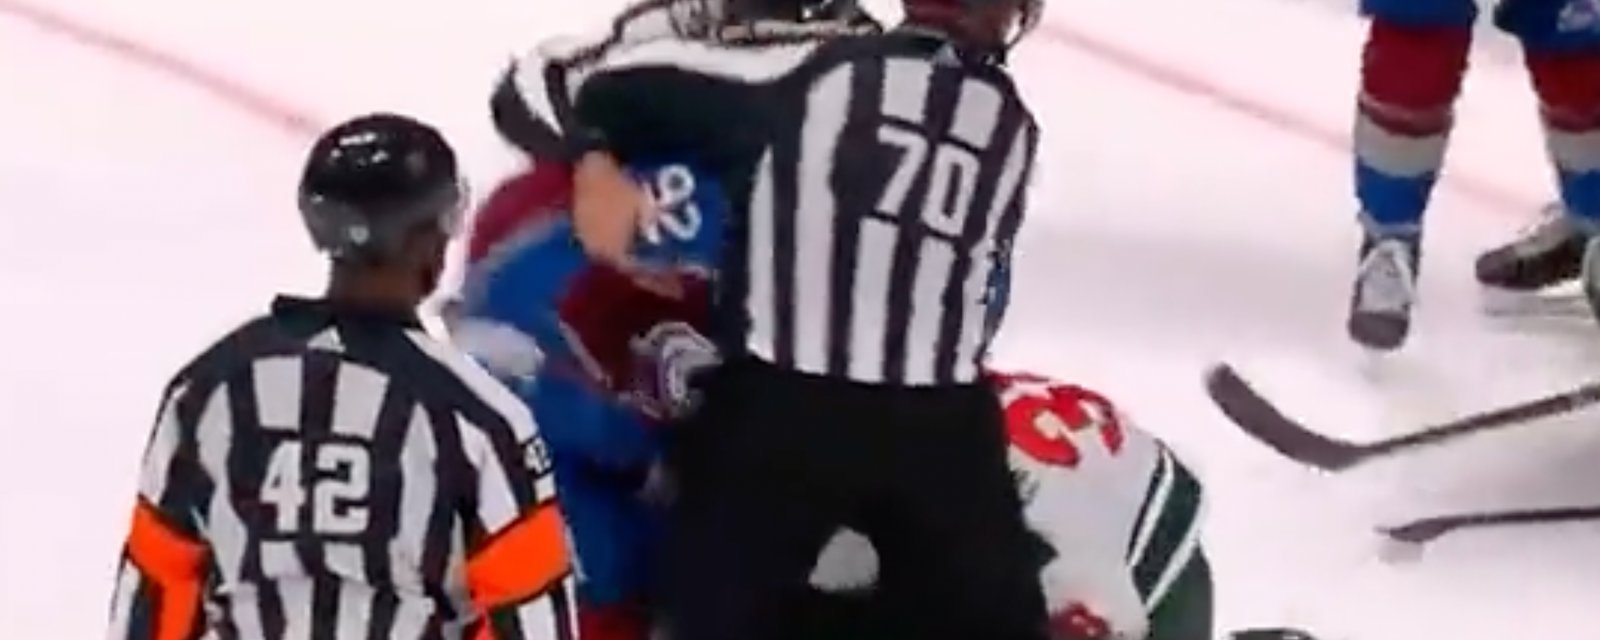 MUST SEE: Landeskog loses it, fights off linesmen to get to Hartman! 